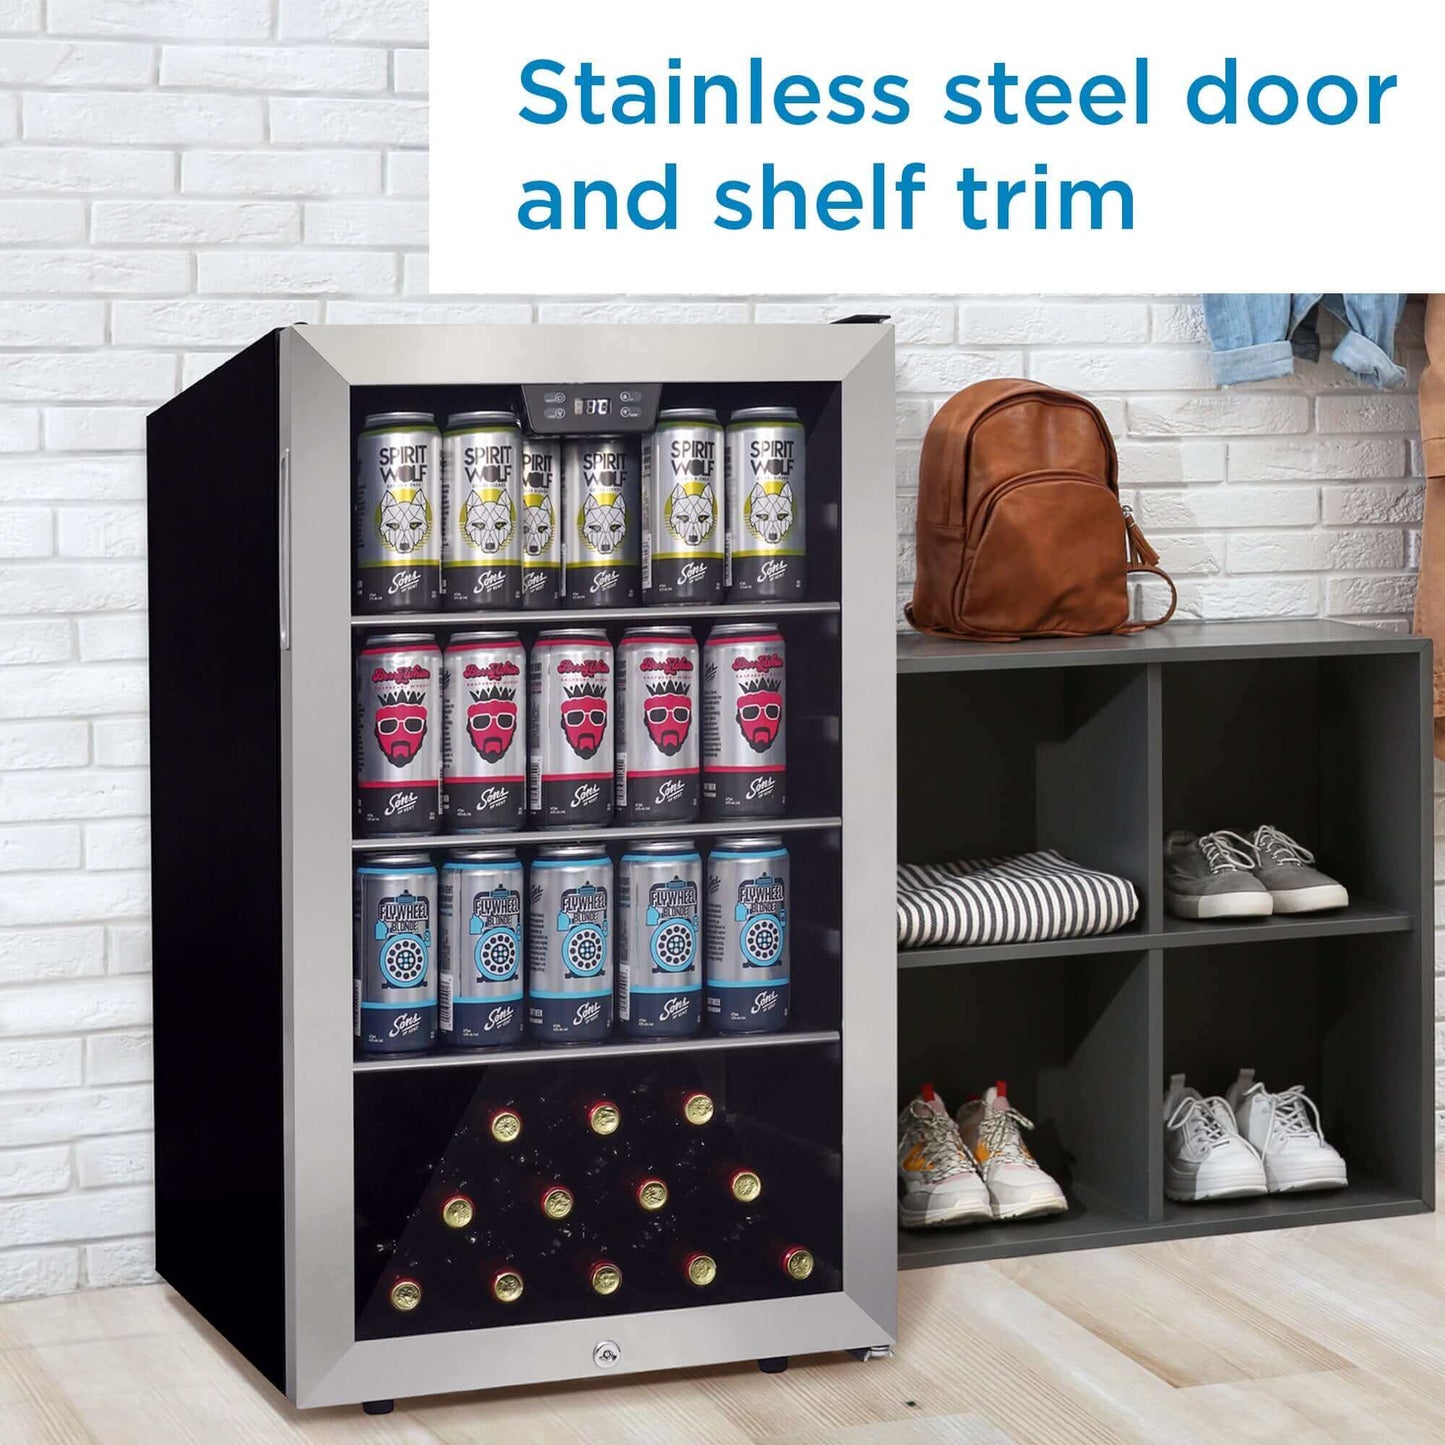 Danby 4.5 cu. ft. Free-Standing Beverage Center in Stainless Steel